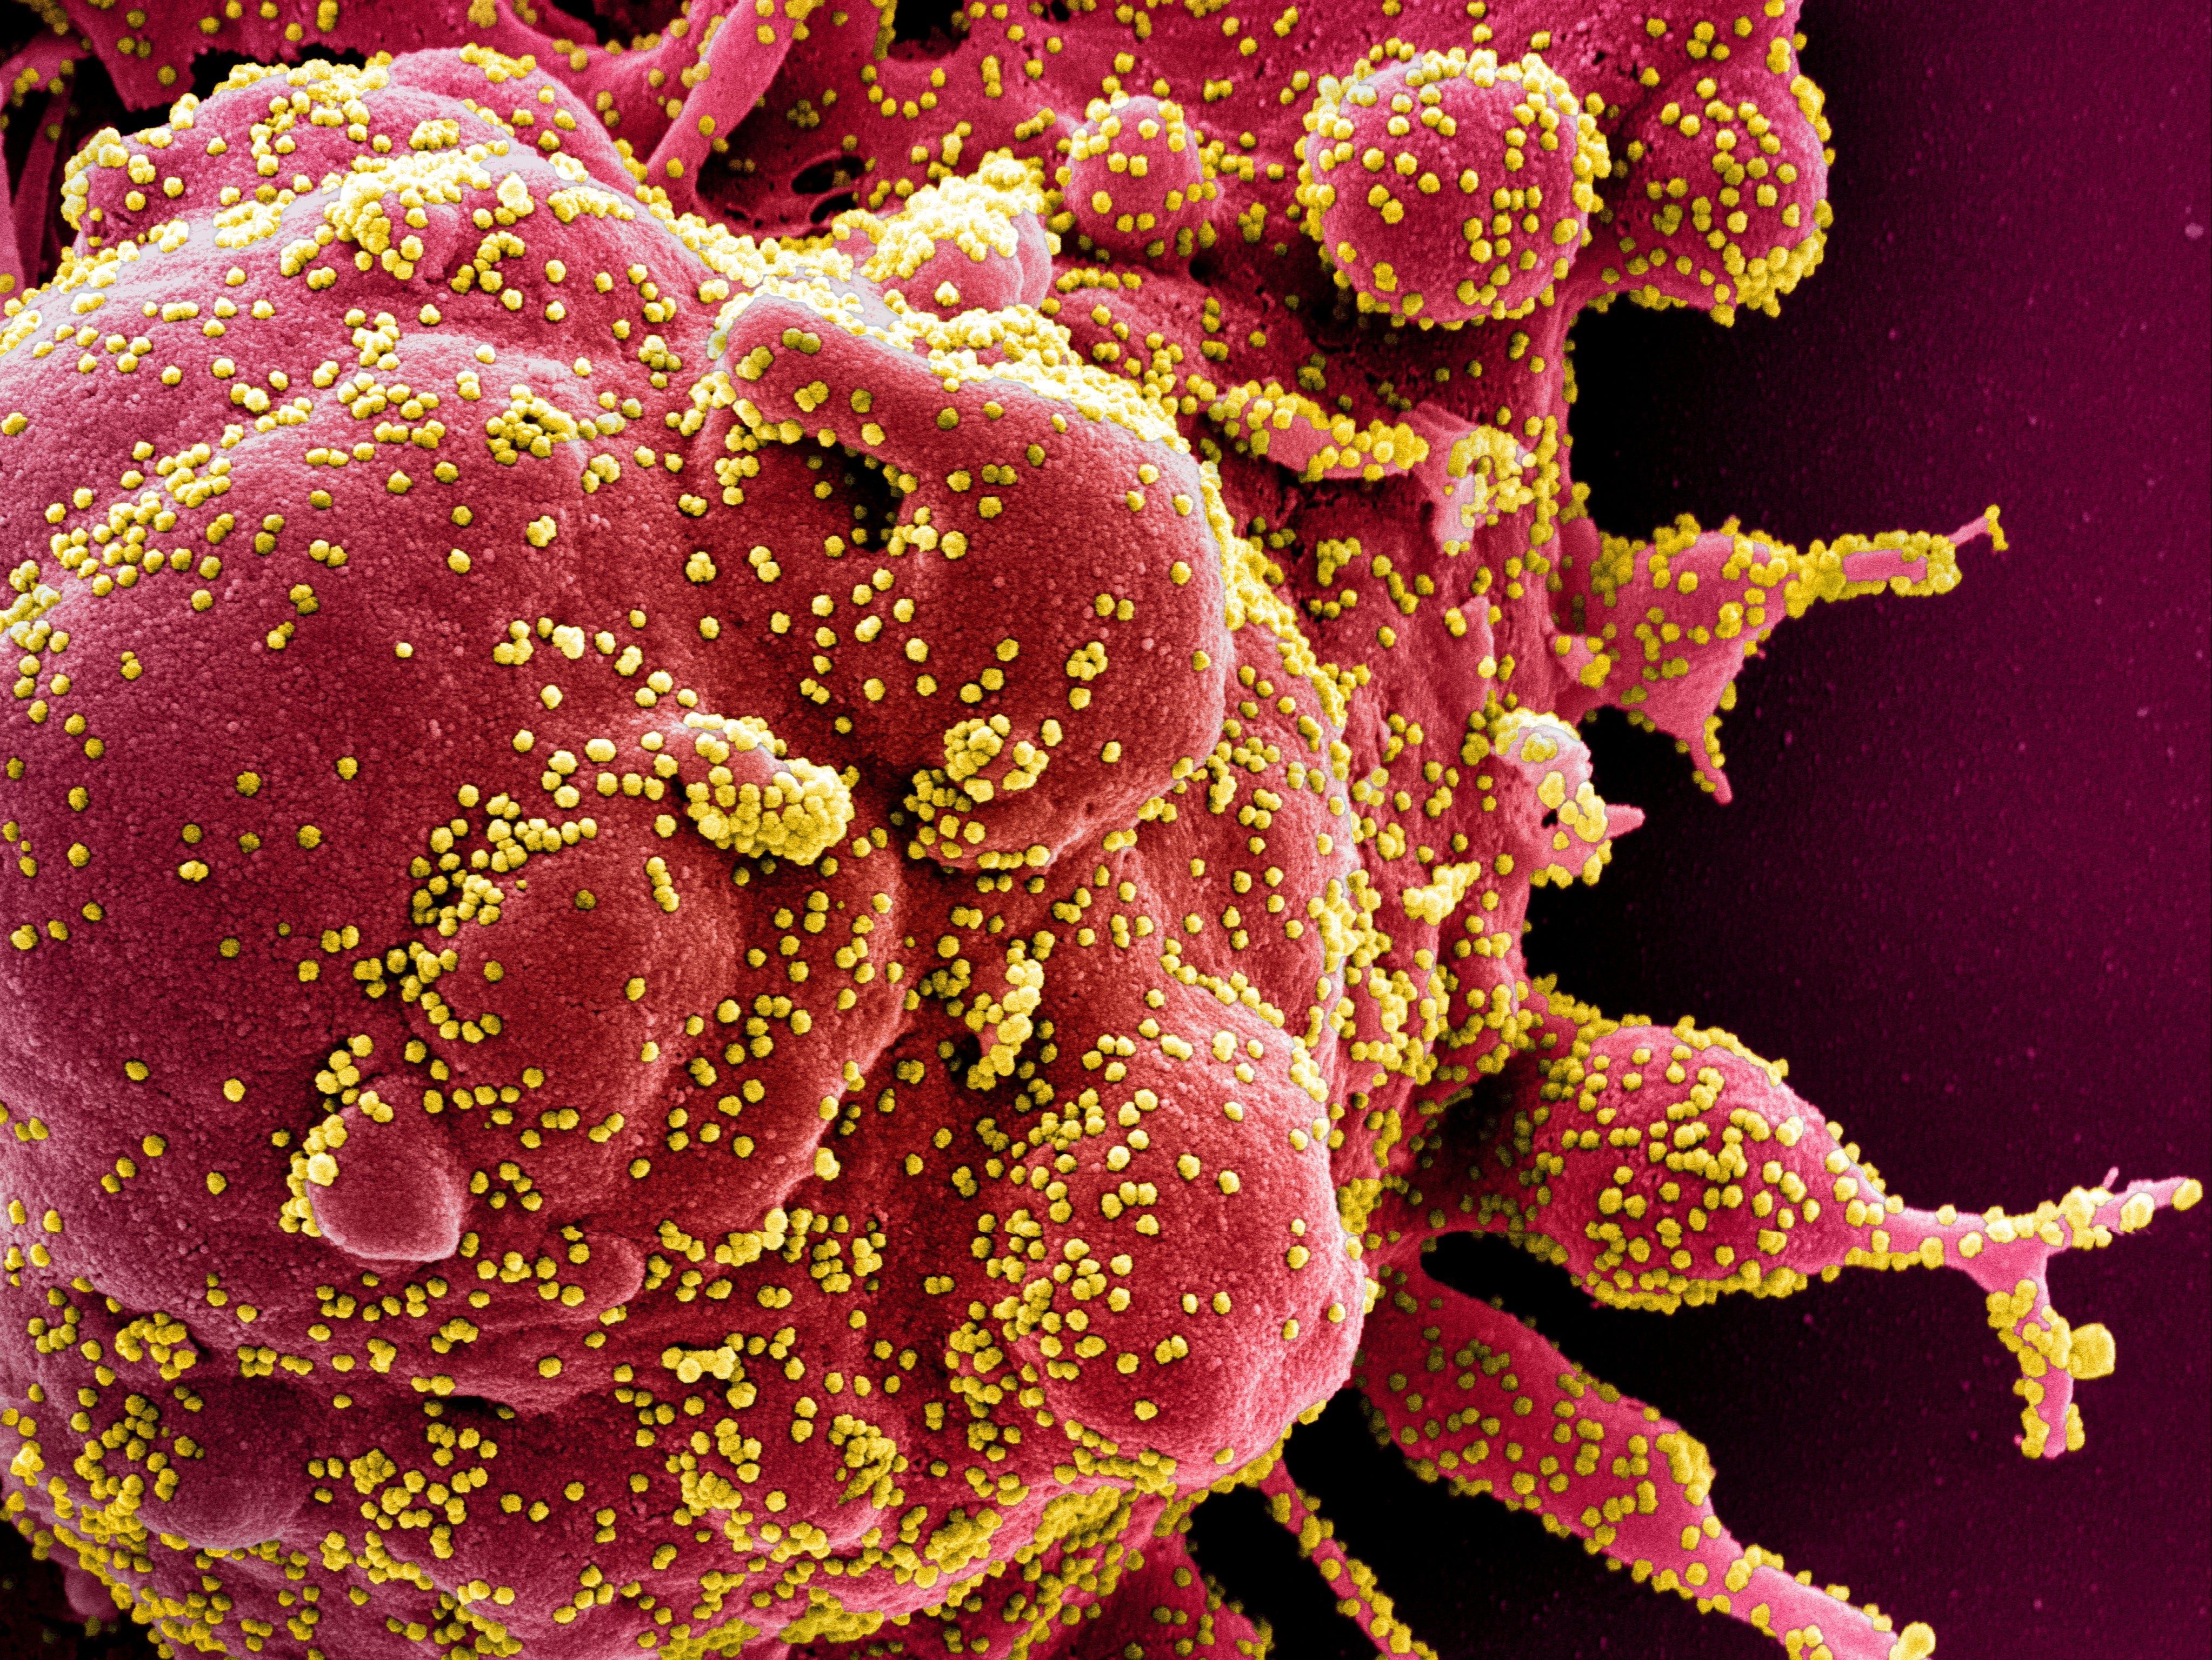 Coloured scanning electron micrograph of an apoptotic cell (red) infected with coronavirus particles (yellow) isolated from a patient sample